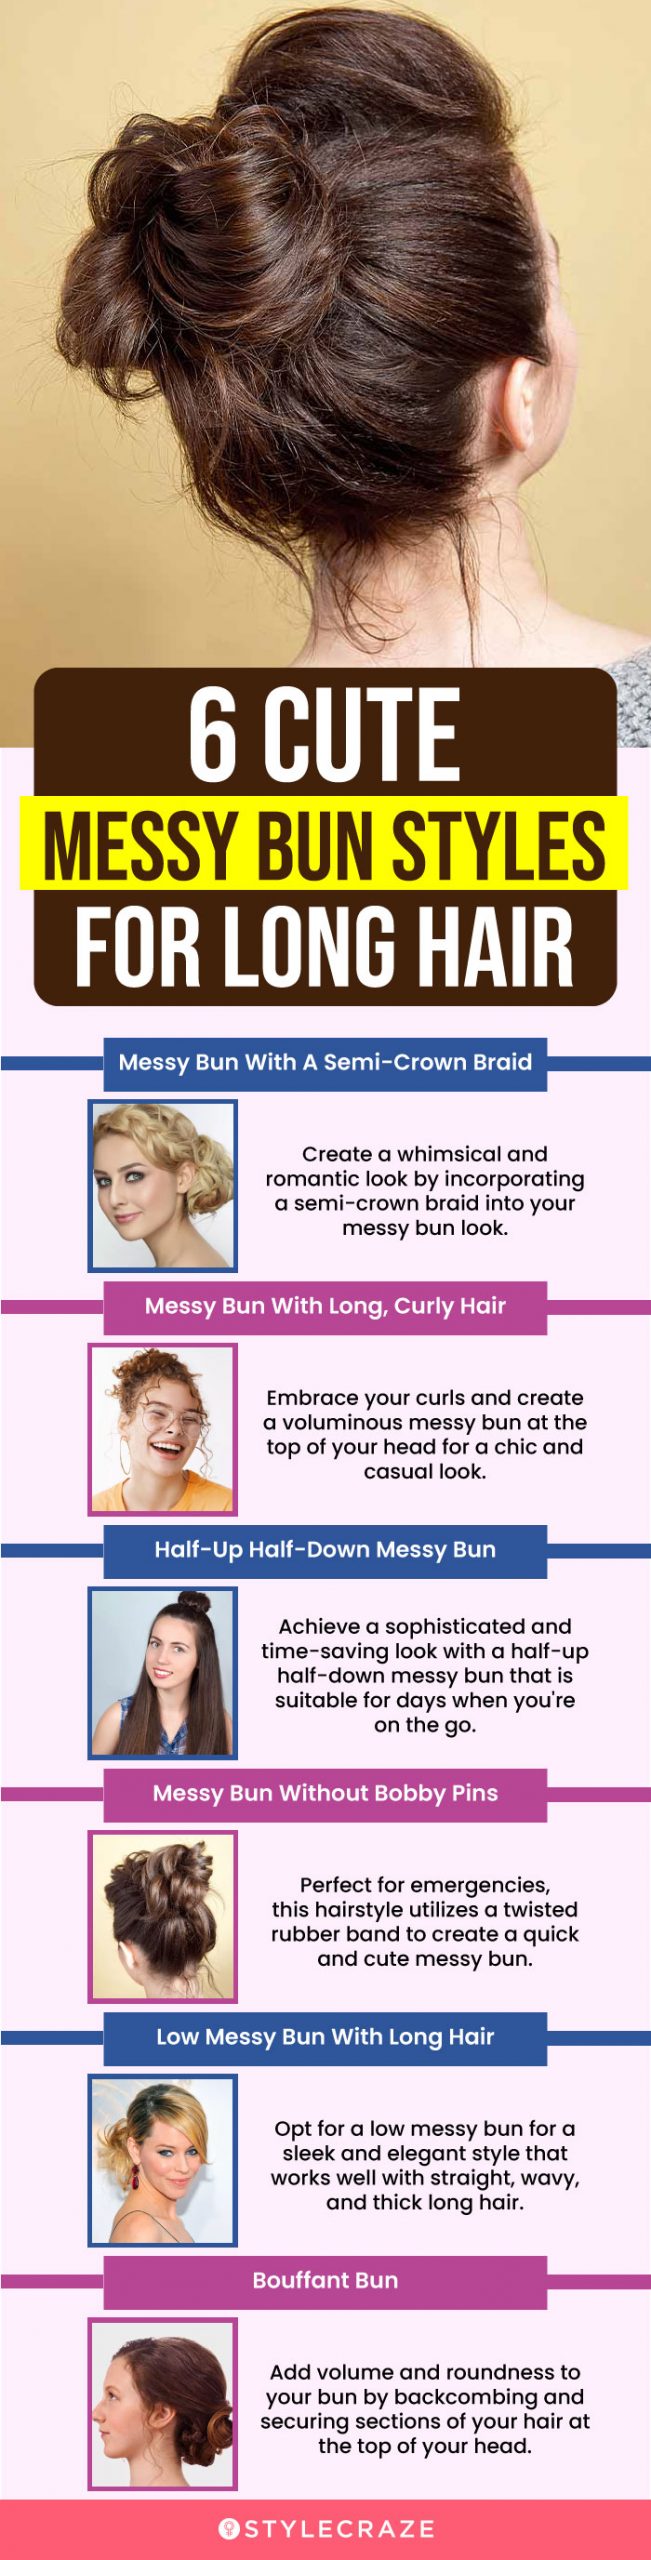 6 cute messy bun styles for long hair (infographic)